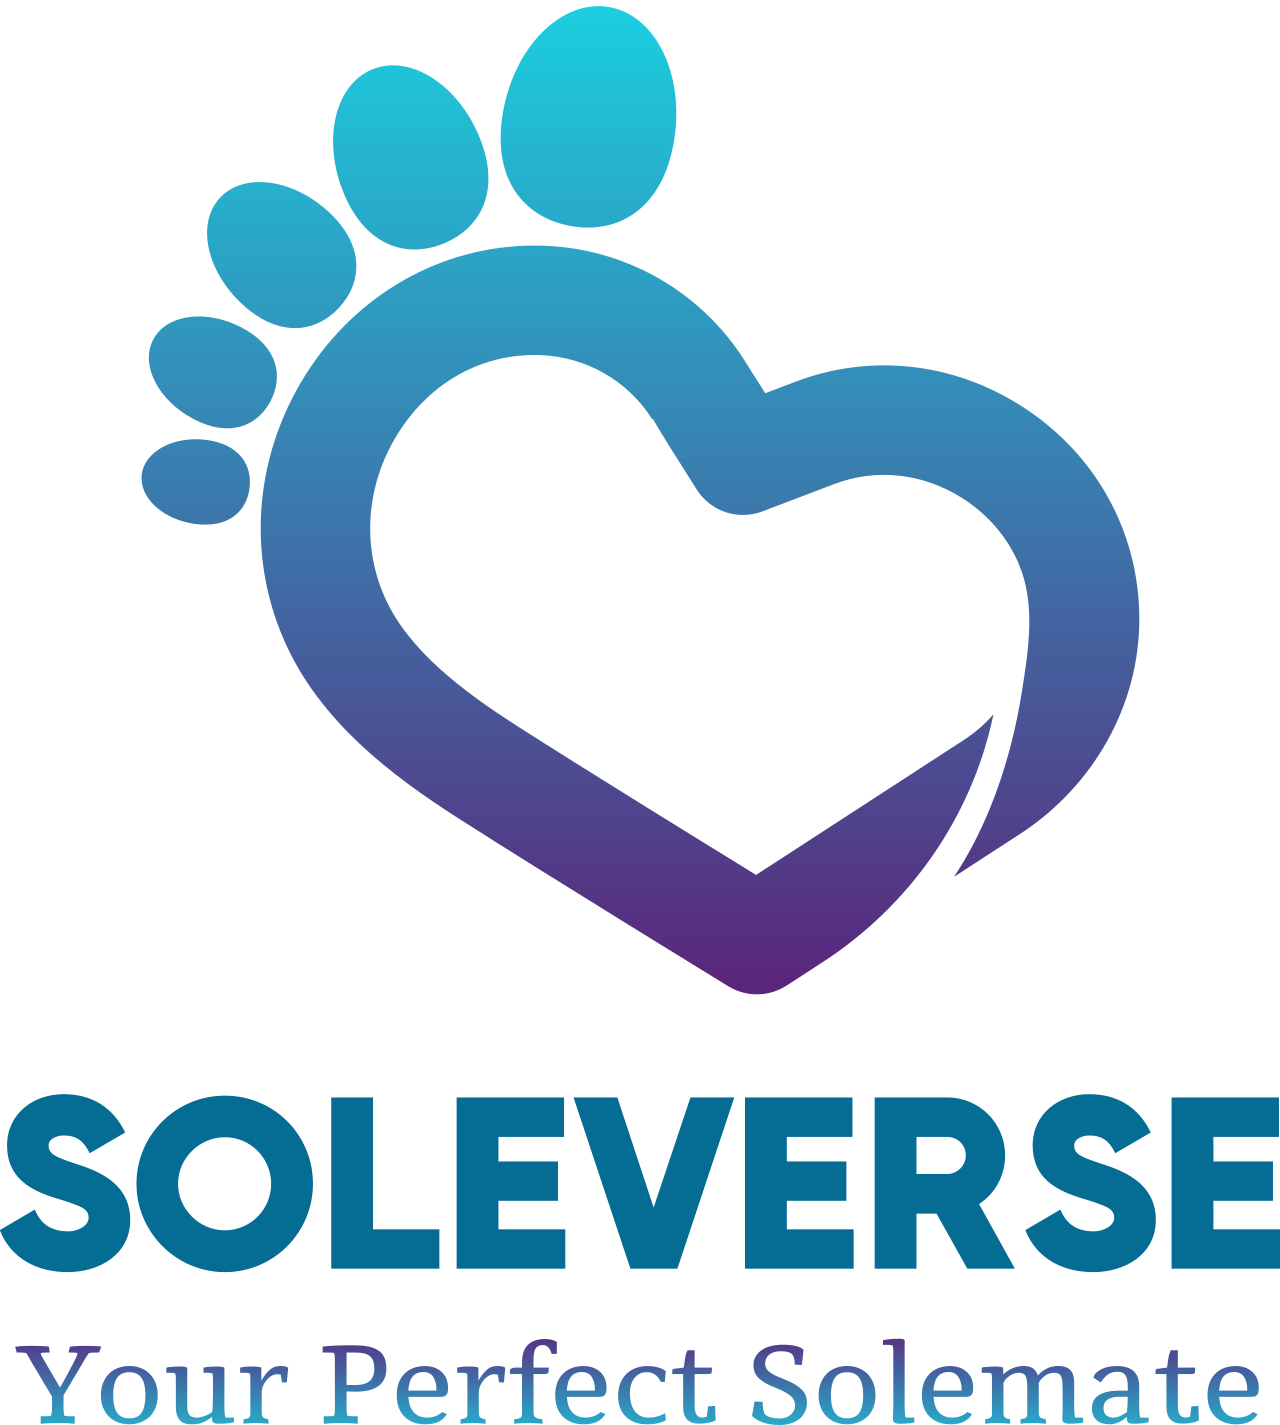 Soleverse's web page